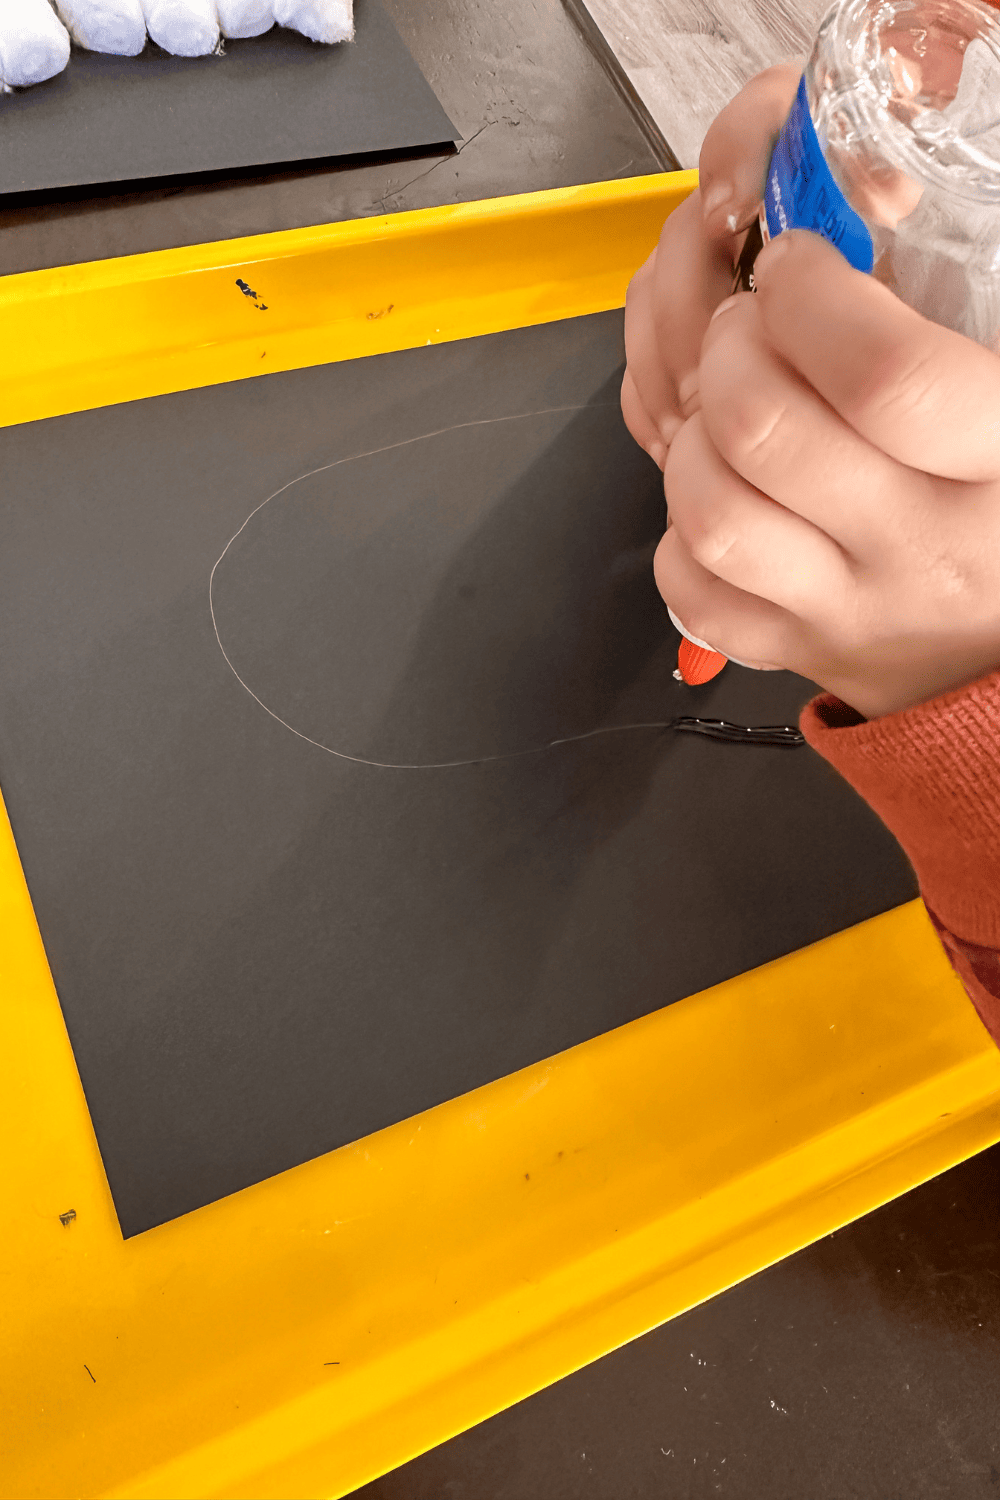 a child's hands applying glue to black paper